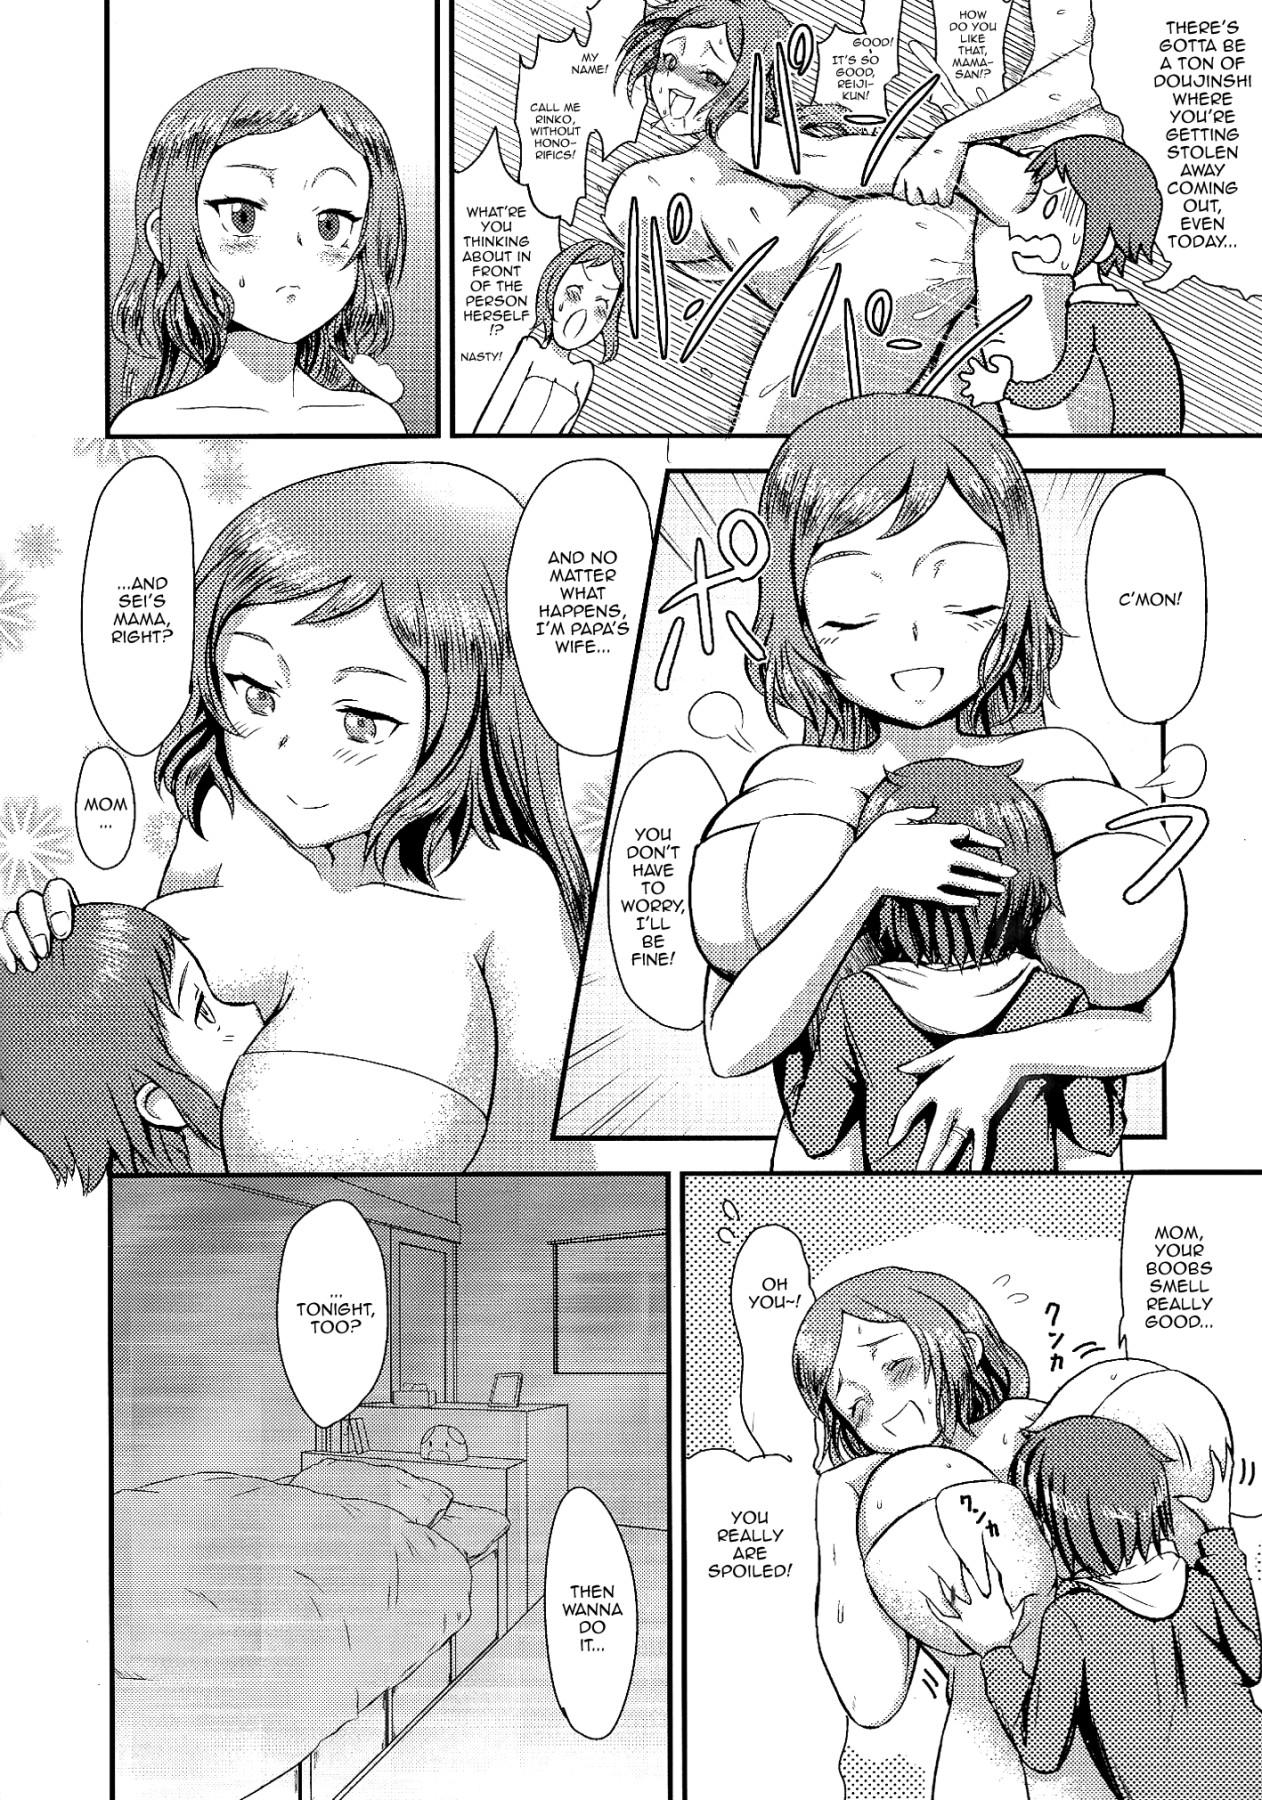 Jerkoff Rinko Mama to Nyan x2 shitaai!! | I Want To Meow With Mama Rinko!! - Gundam build fighters Que - Page 3